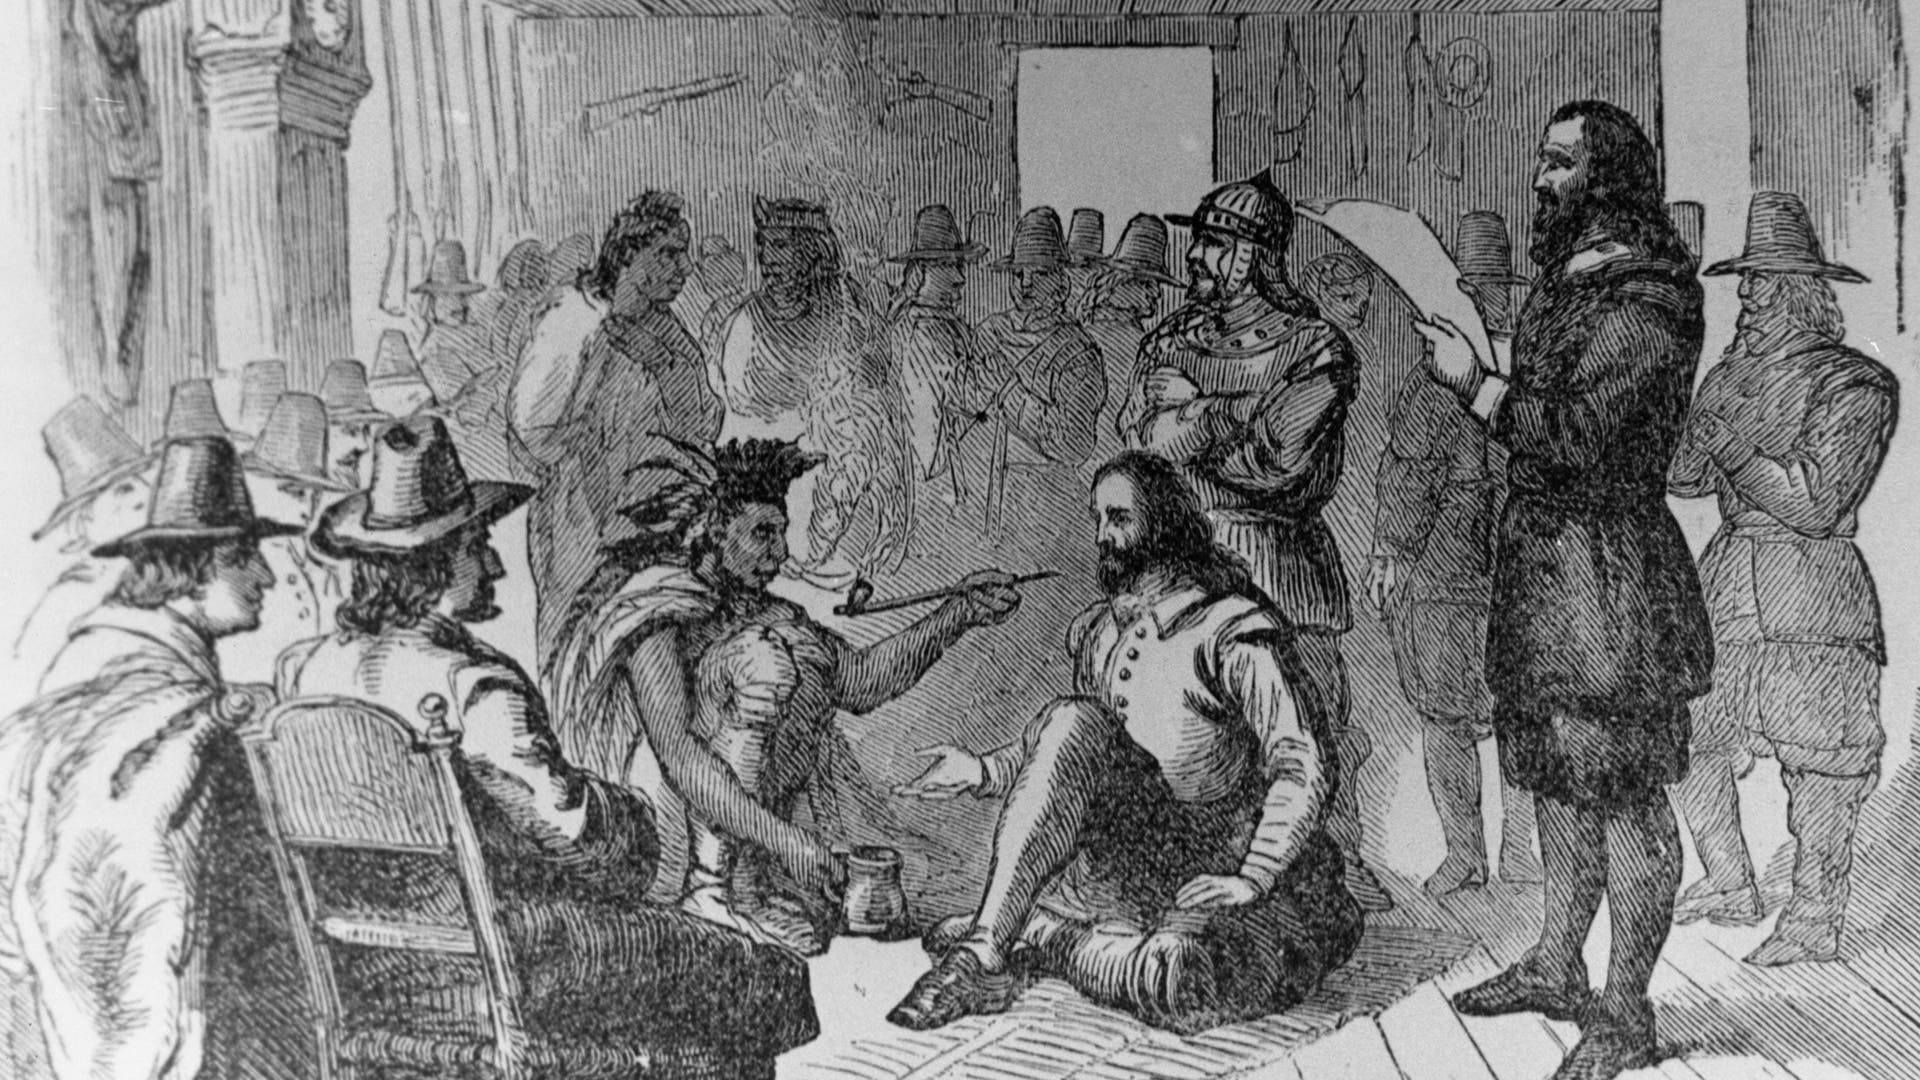 Ousamequin, chief of the Wampanoag signs a peace treaty with Governor John Carver (1576 - 1621).